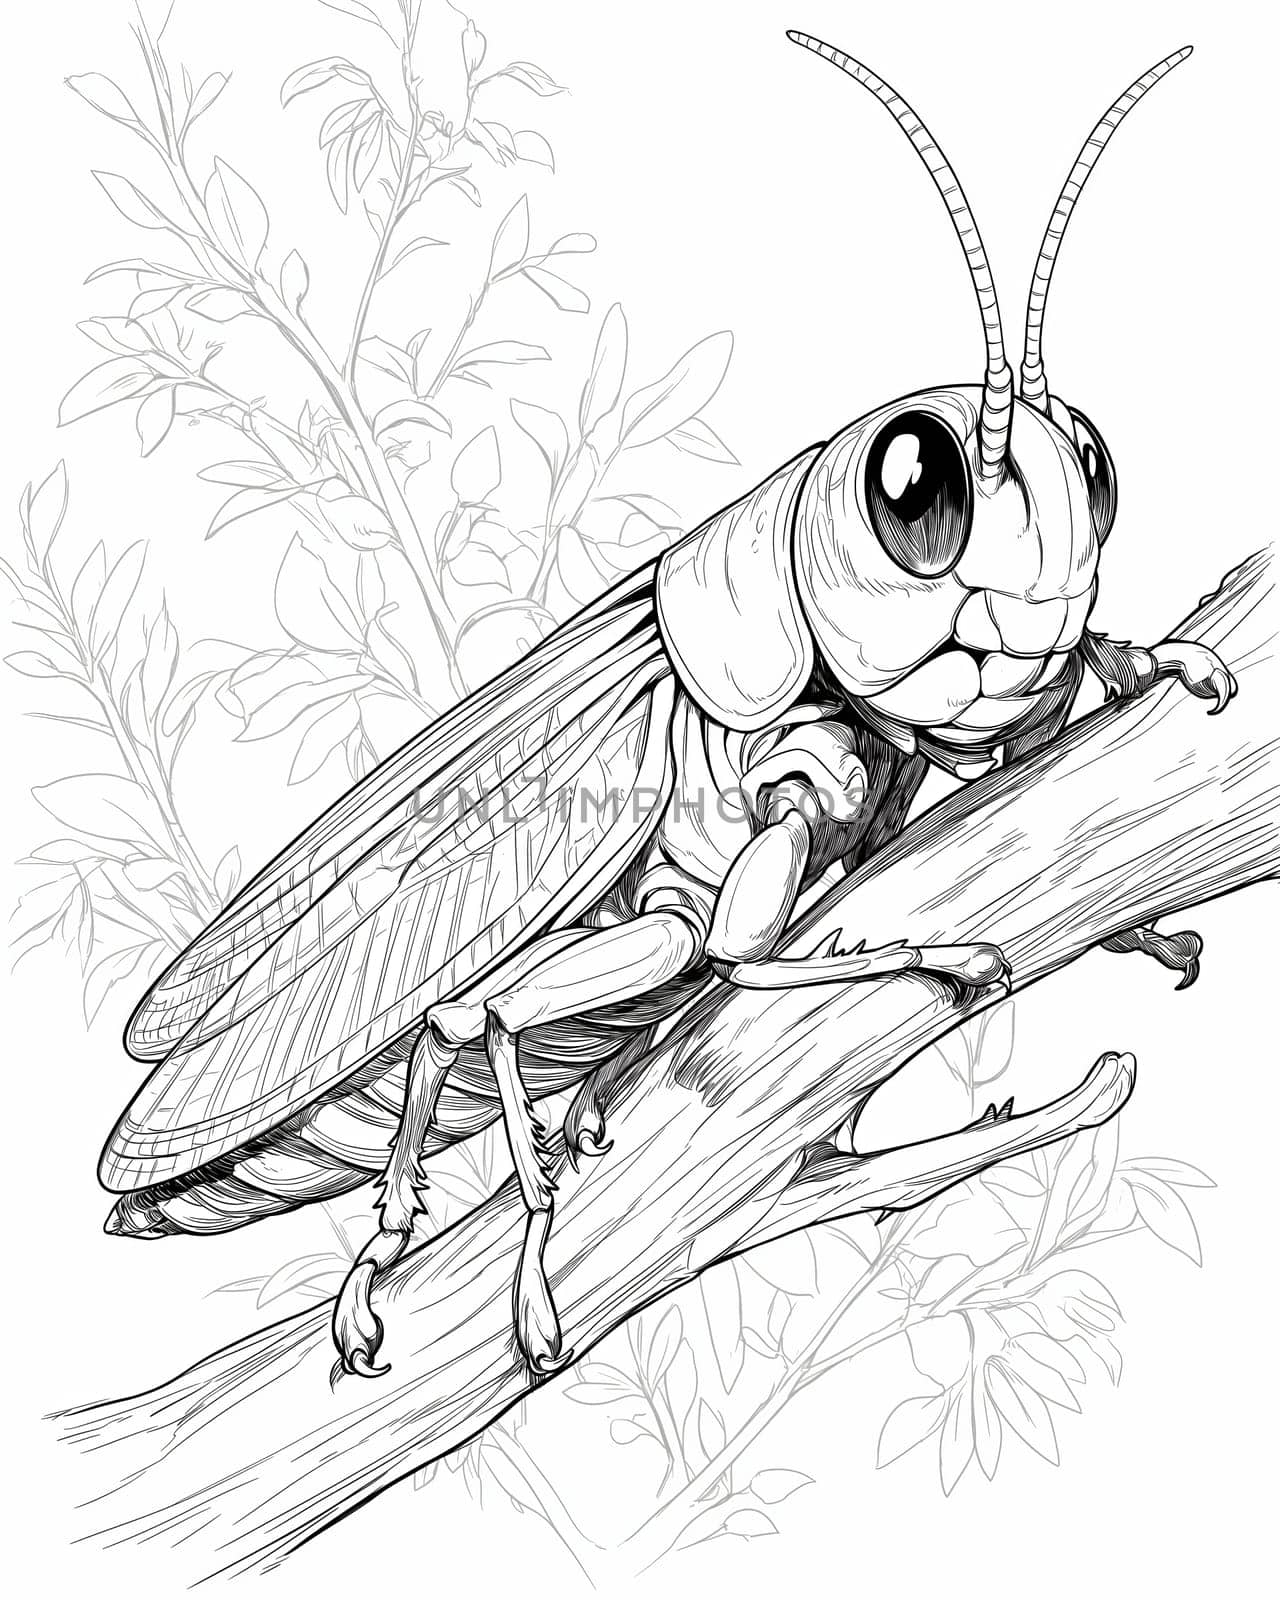 Coloring book for kids, insect coloring, grasshopper. by Fischeron